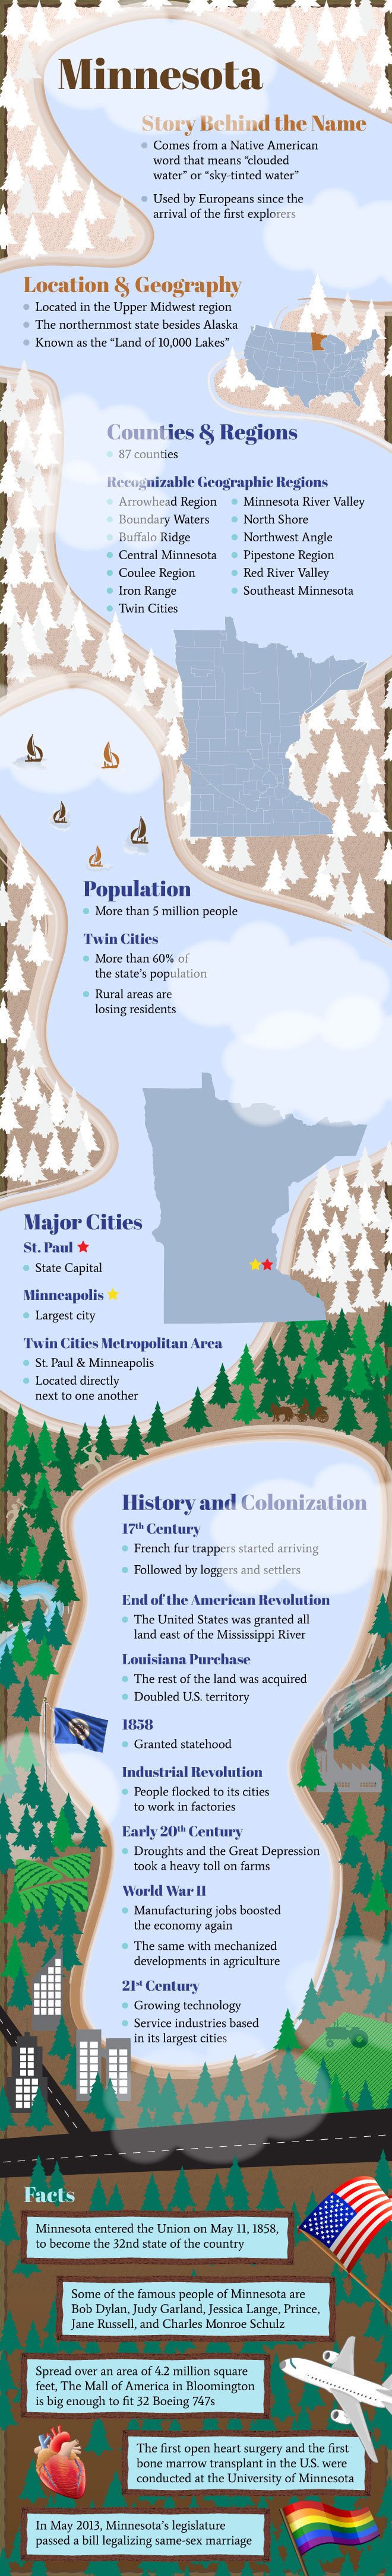 Infographic of Minnesota Fast Facts